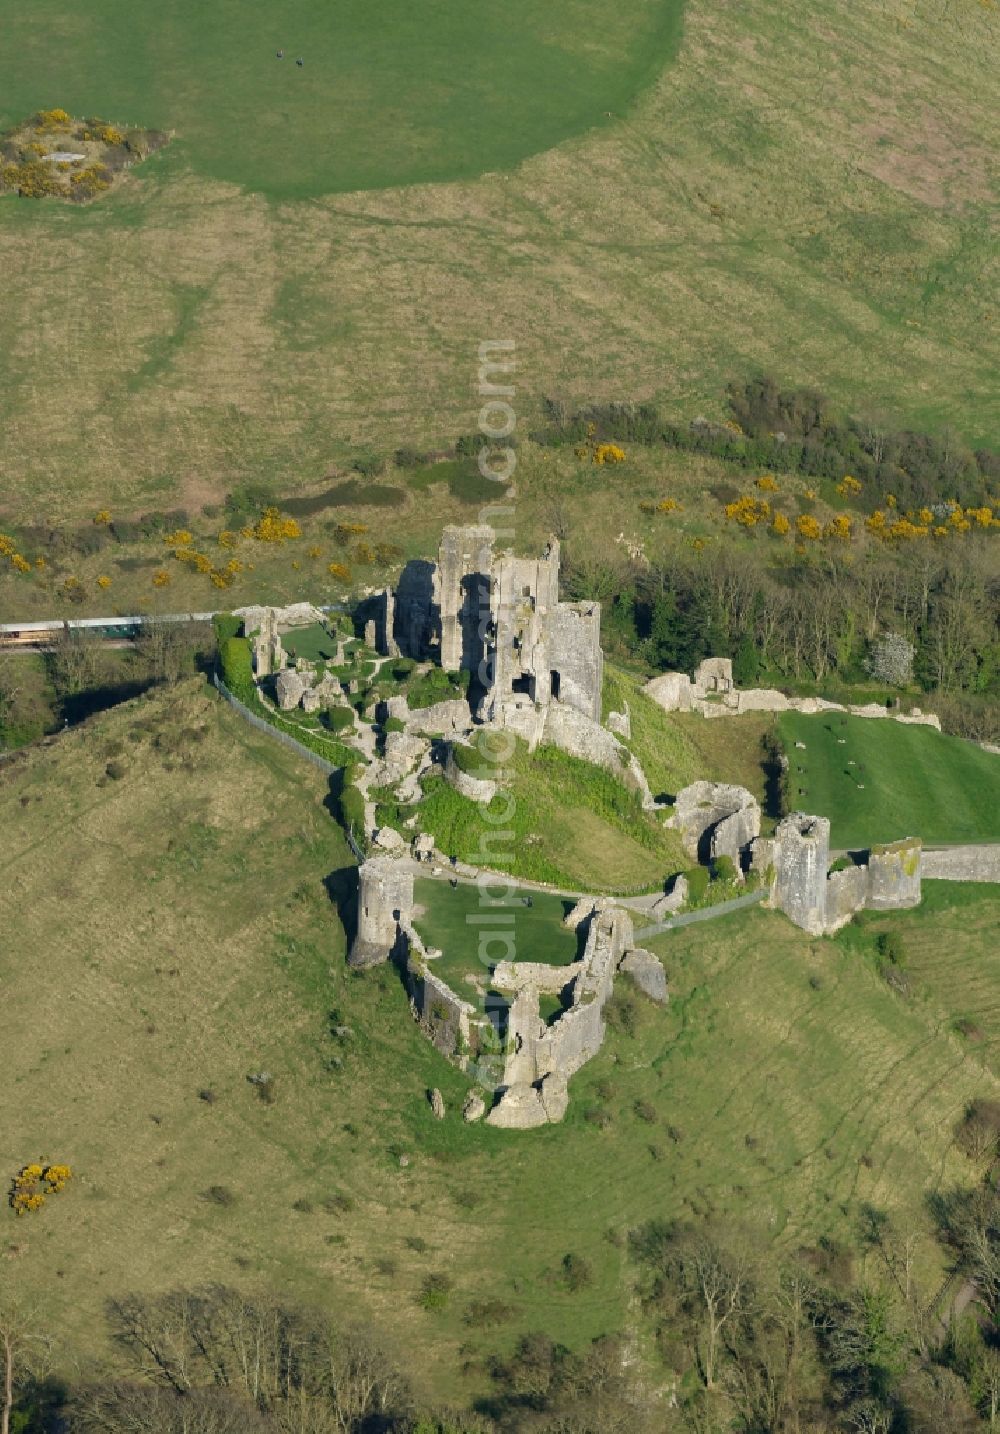 Corfe Castle from the bird's eye view: Ruins and vestiges of the former castle and fortress Corfe Castle on The Square in Corfe Castle in England, United Kingdom